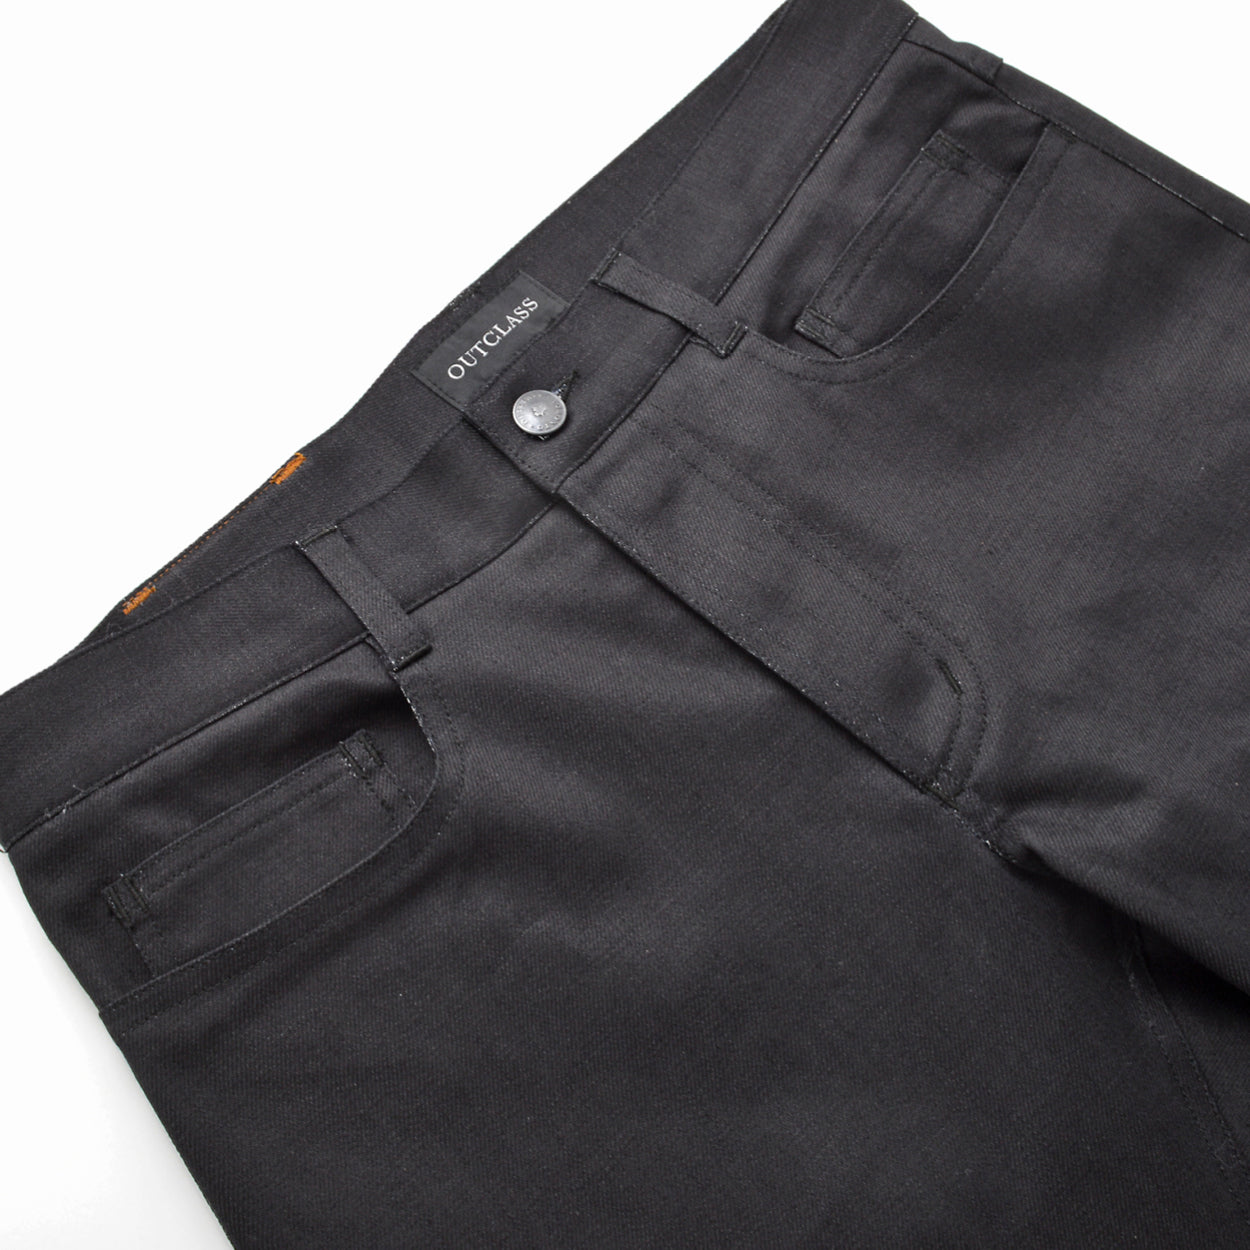 Black Waxed Jeans